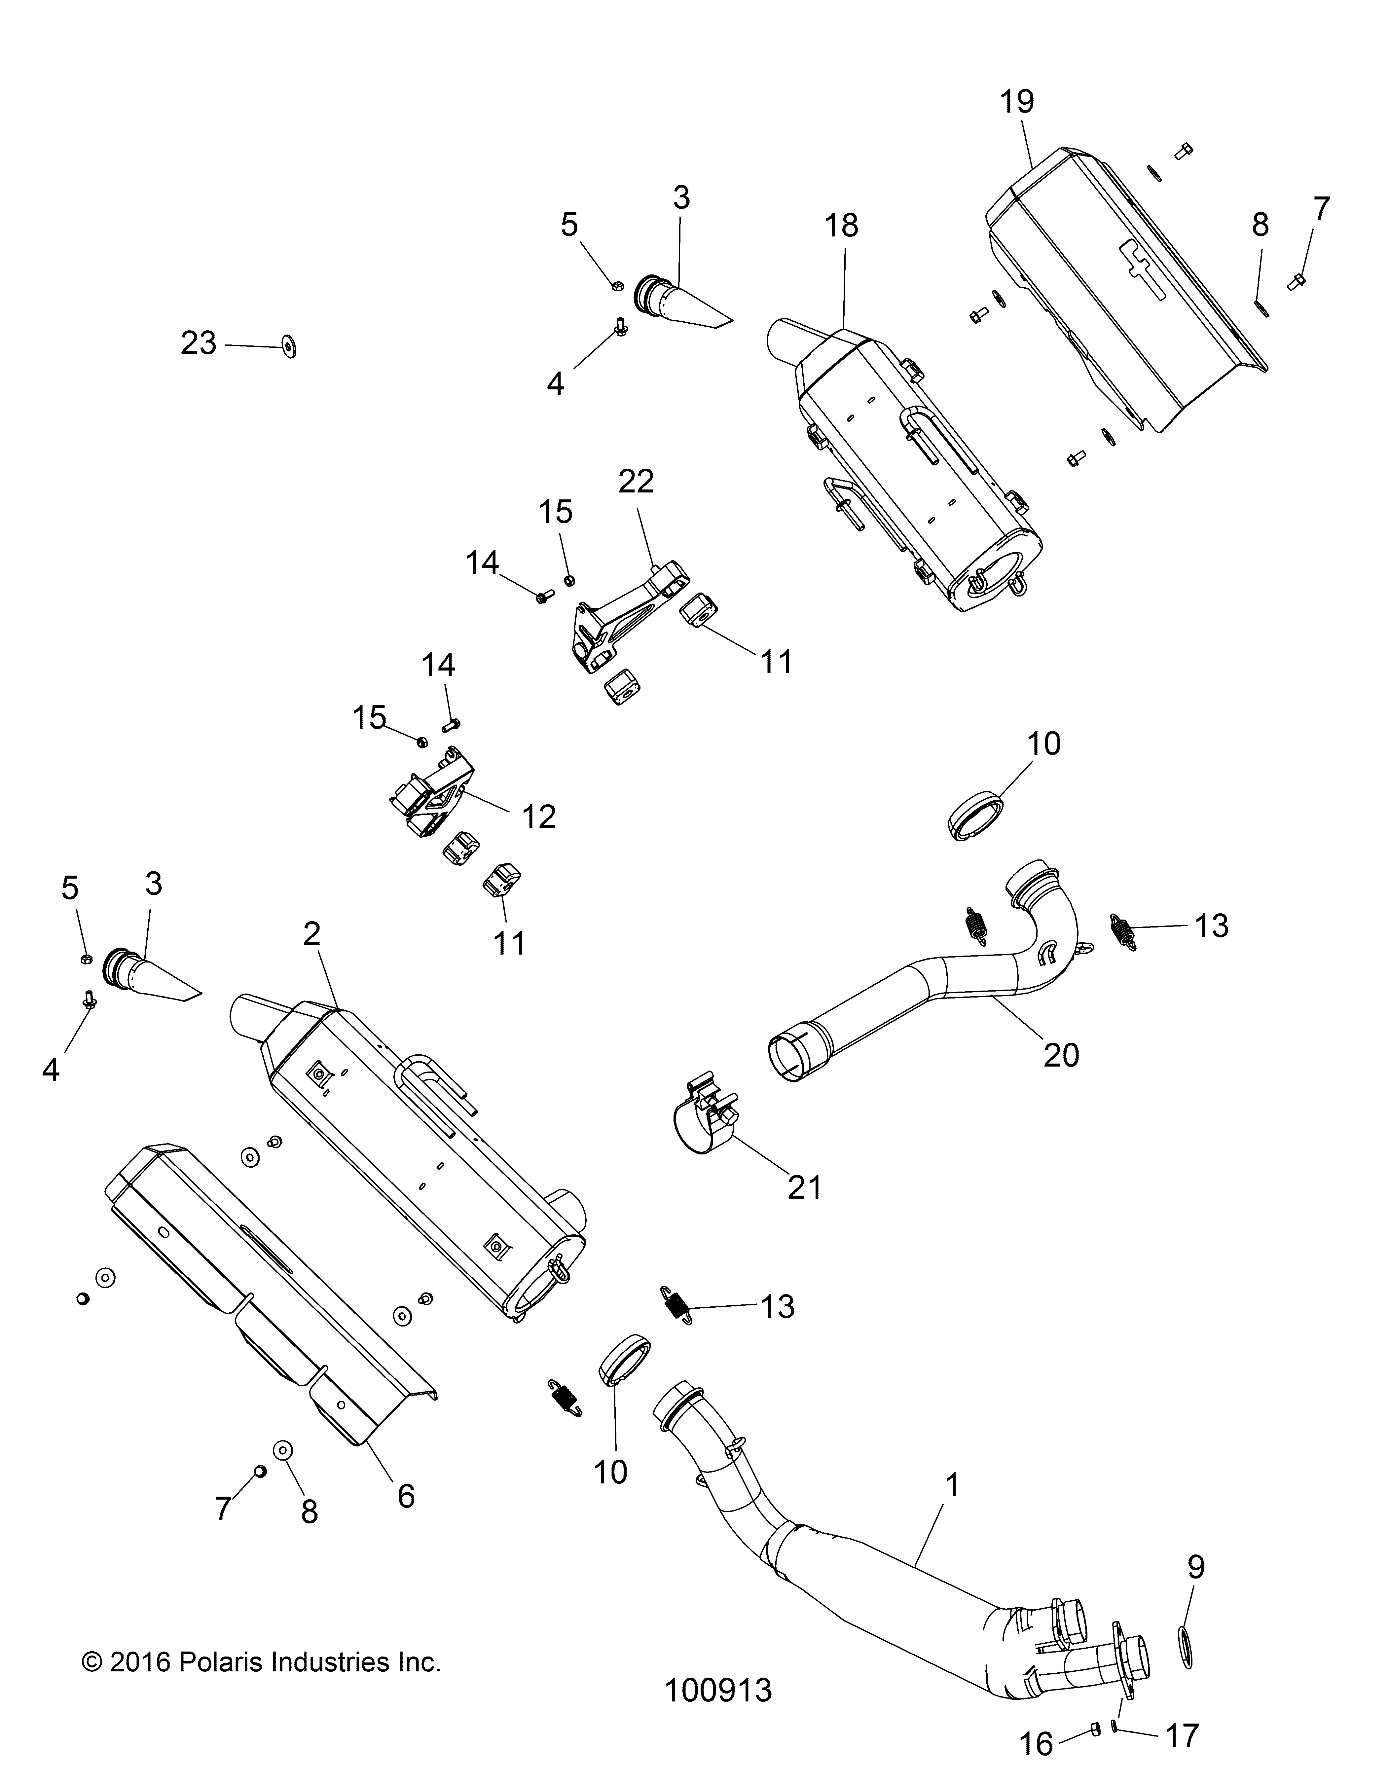 Part Number : 1263019 EXHAUST PIPE ASSEMBLY  TWIN